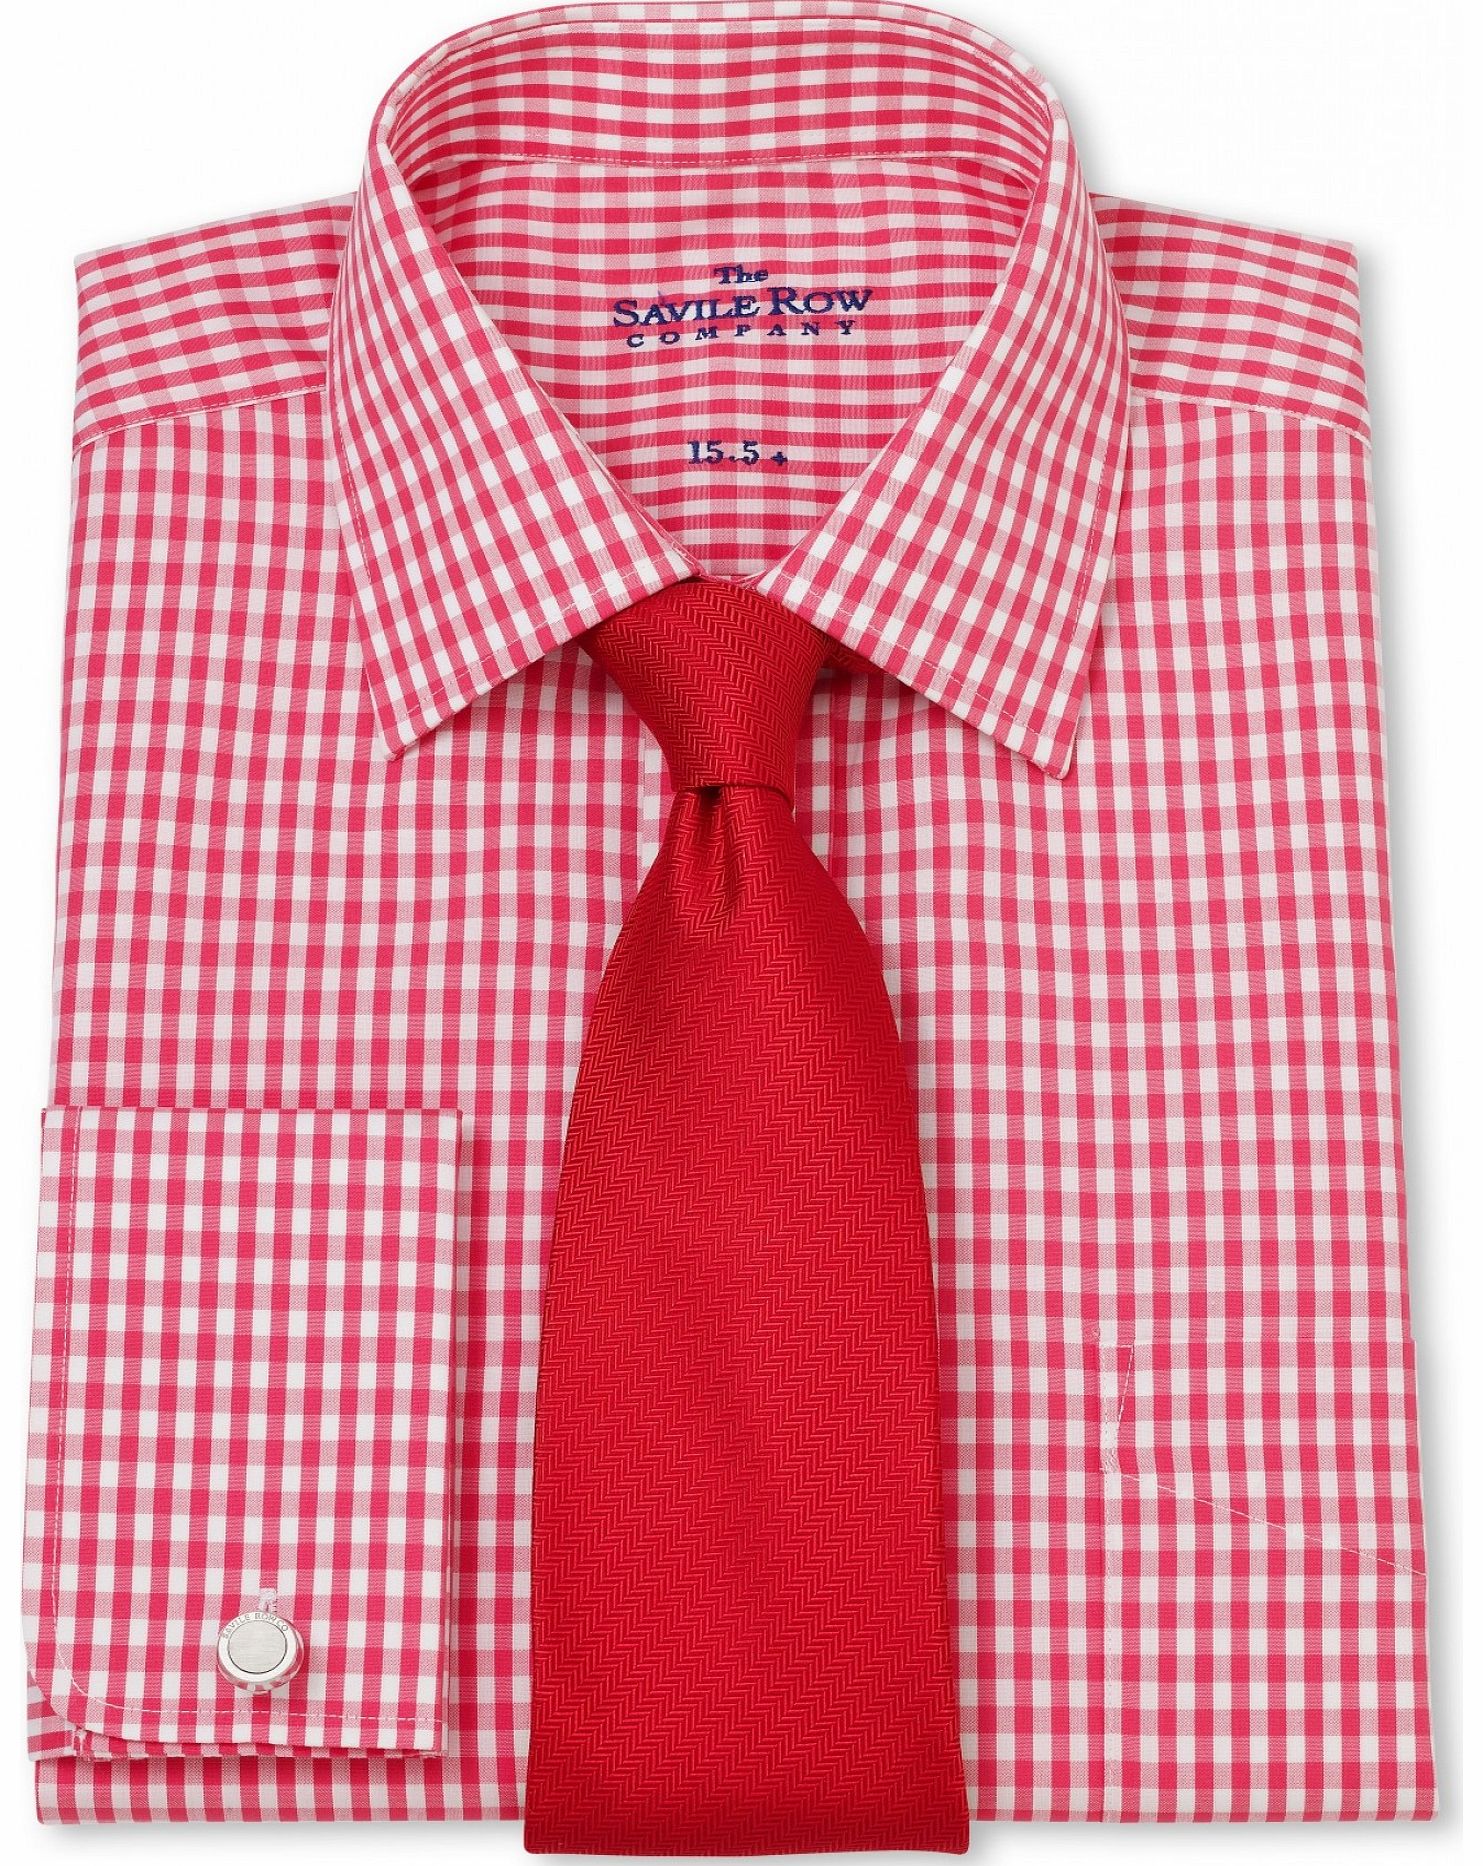 Savile Row Company Pink White Gingham Check Classic Fit Shirt 15``